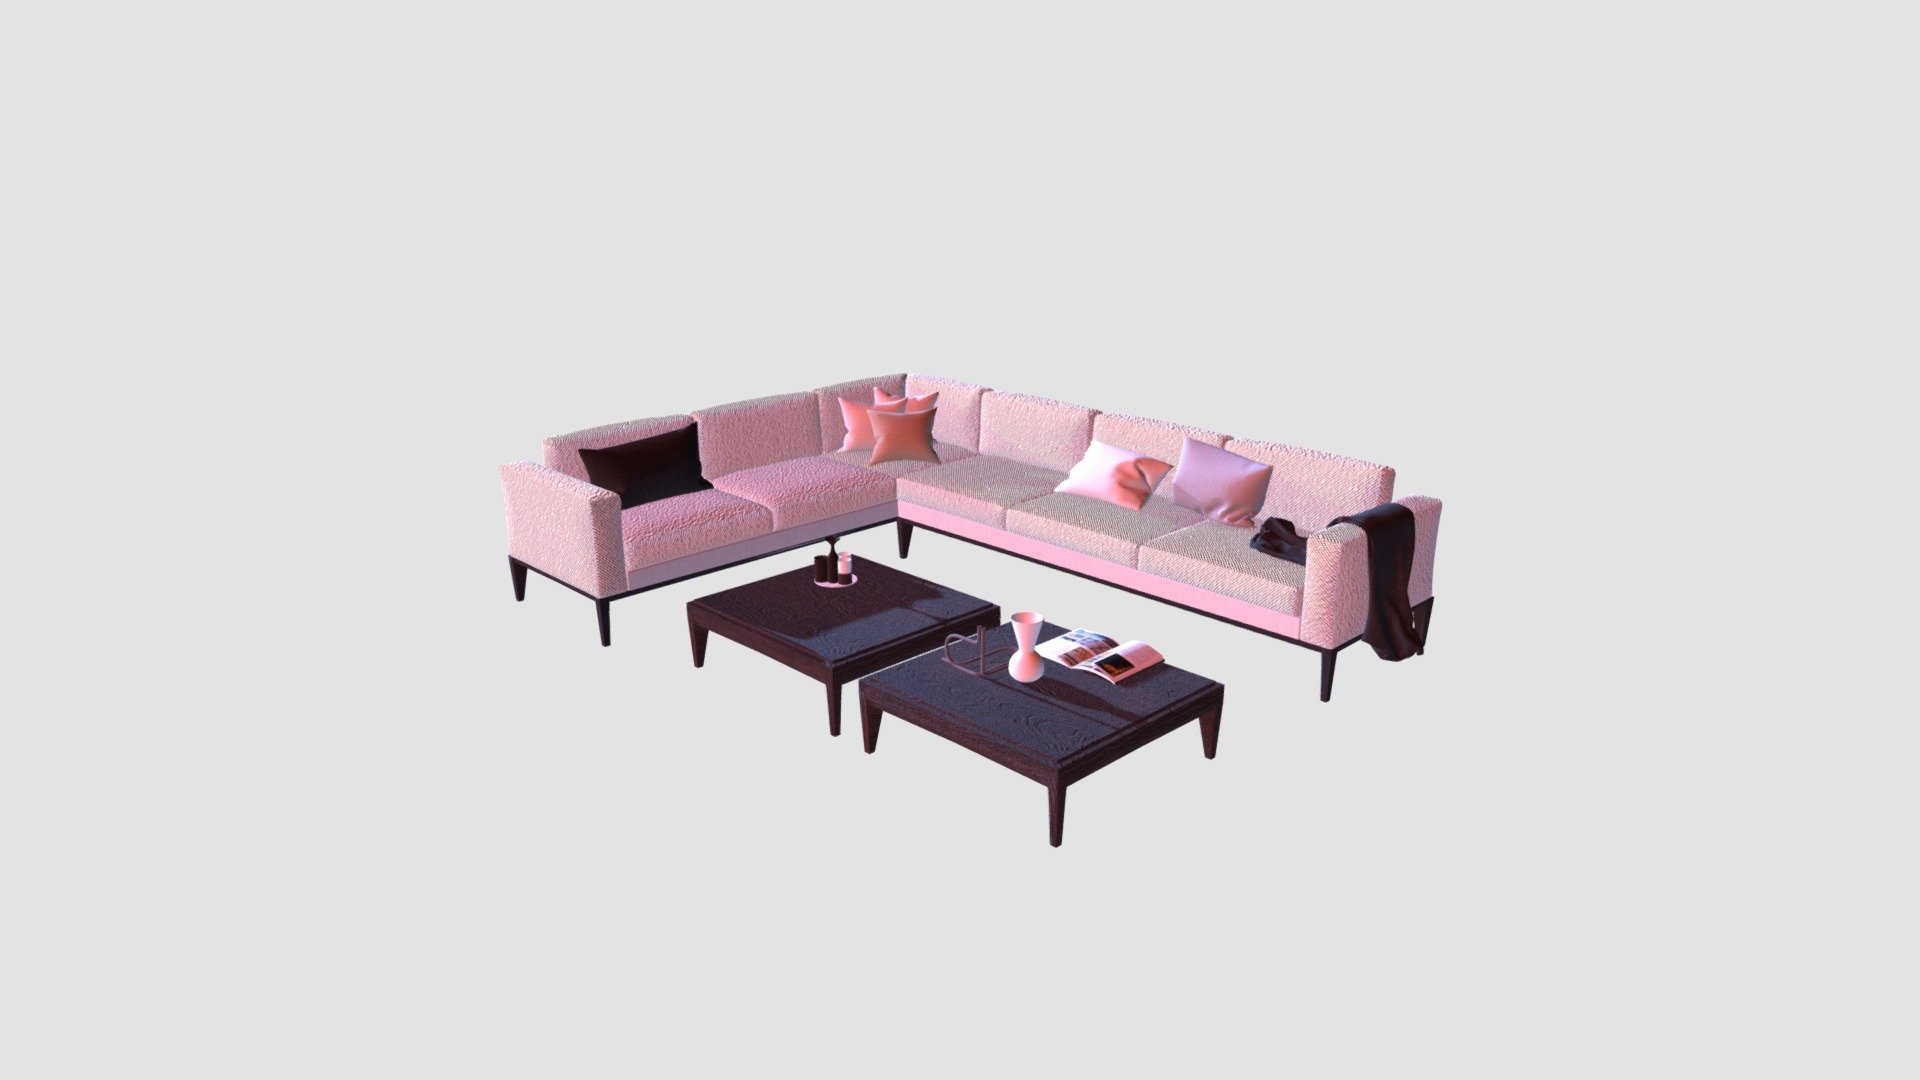 Highly detailed 3d models of furniture with all textures, shaders and materials. It is ready to use, just put it into your scene 3d model